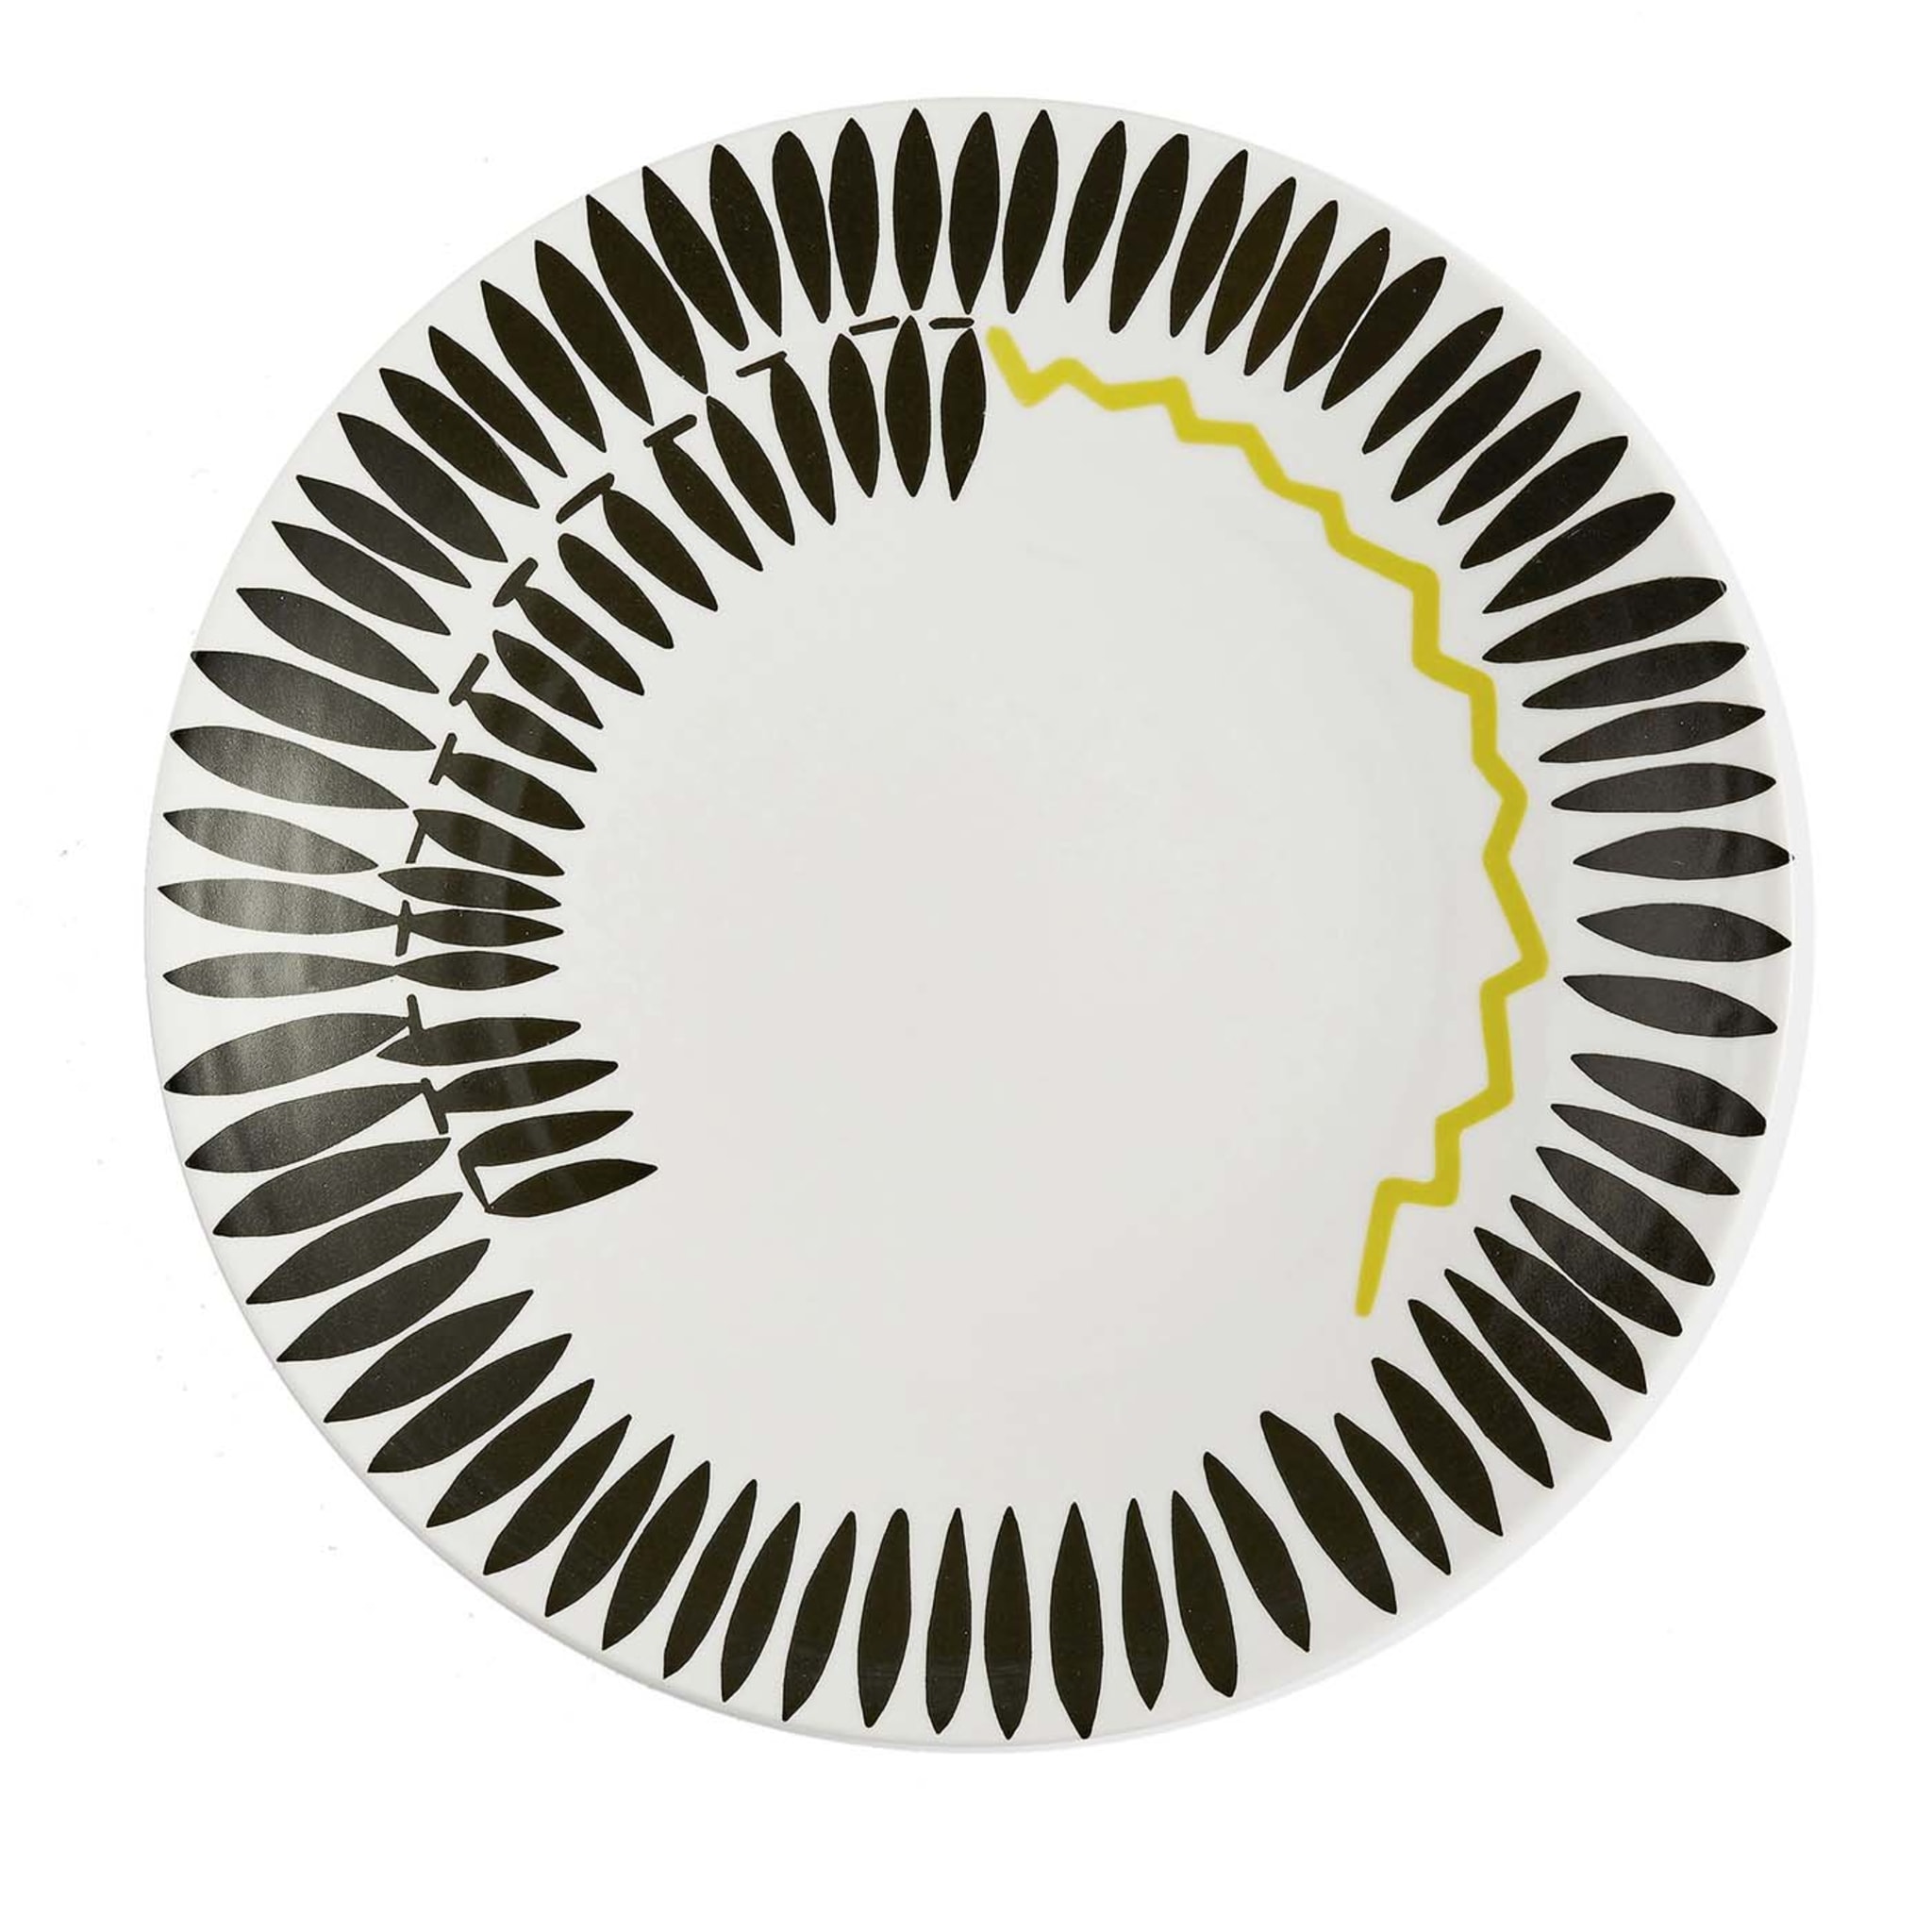 Maschile Charger Plate #7 - Main view